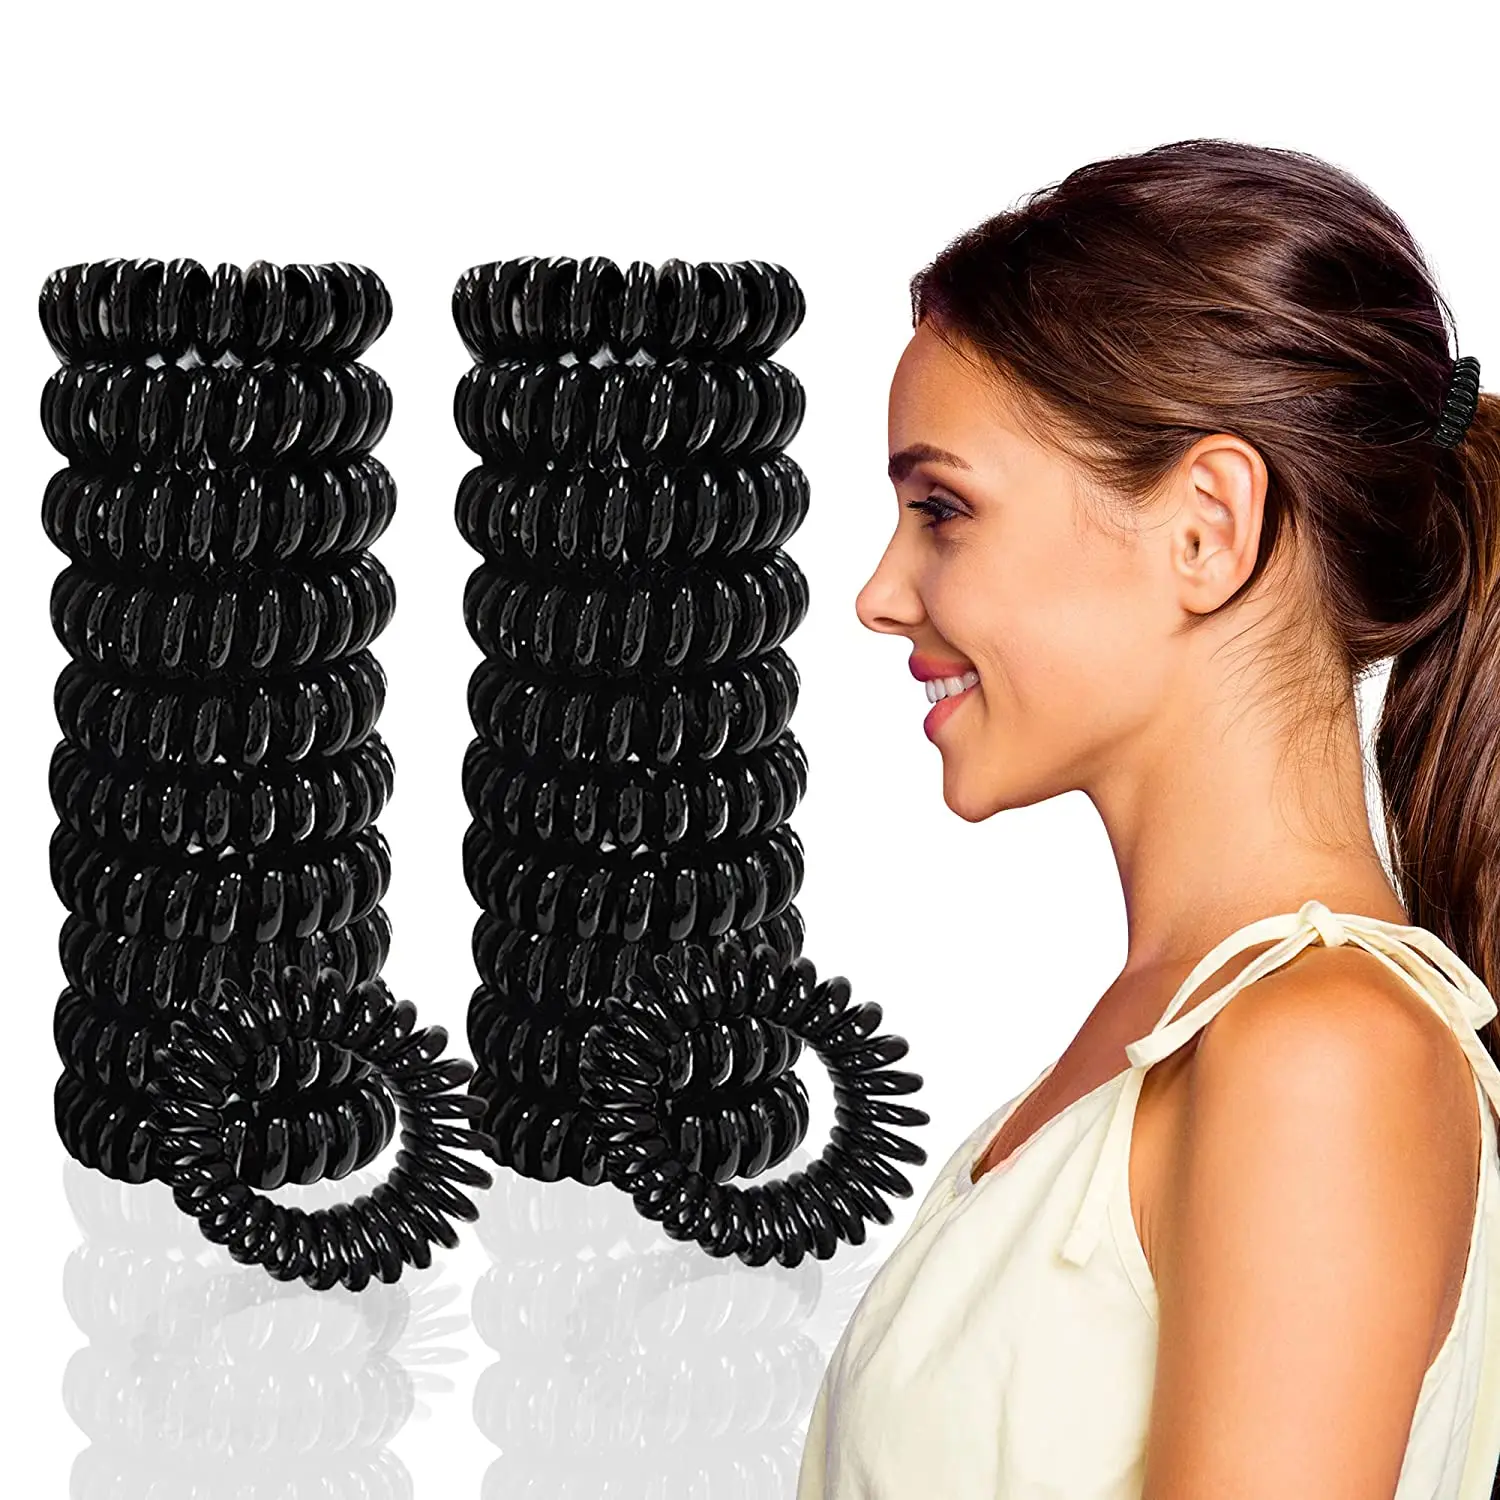 

30PCS Wholesale Black Elastic Telephone Line Hair Ties For Women Rubber Band Hair Rope Accessories Lady Headdress 2021